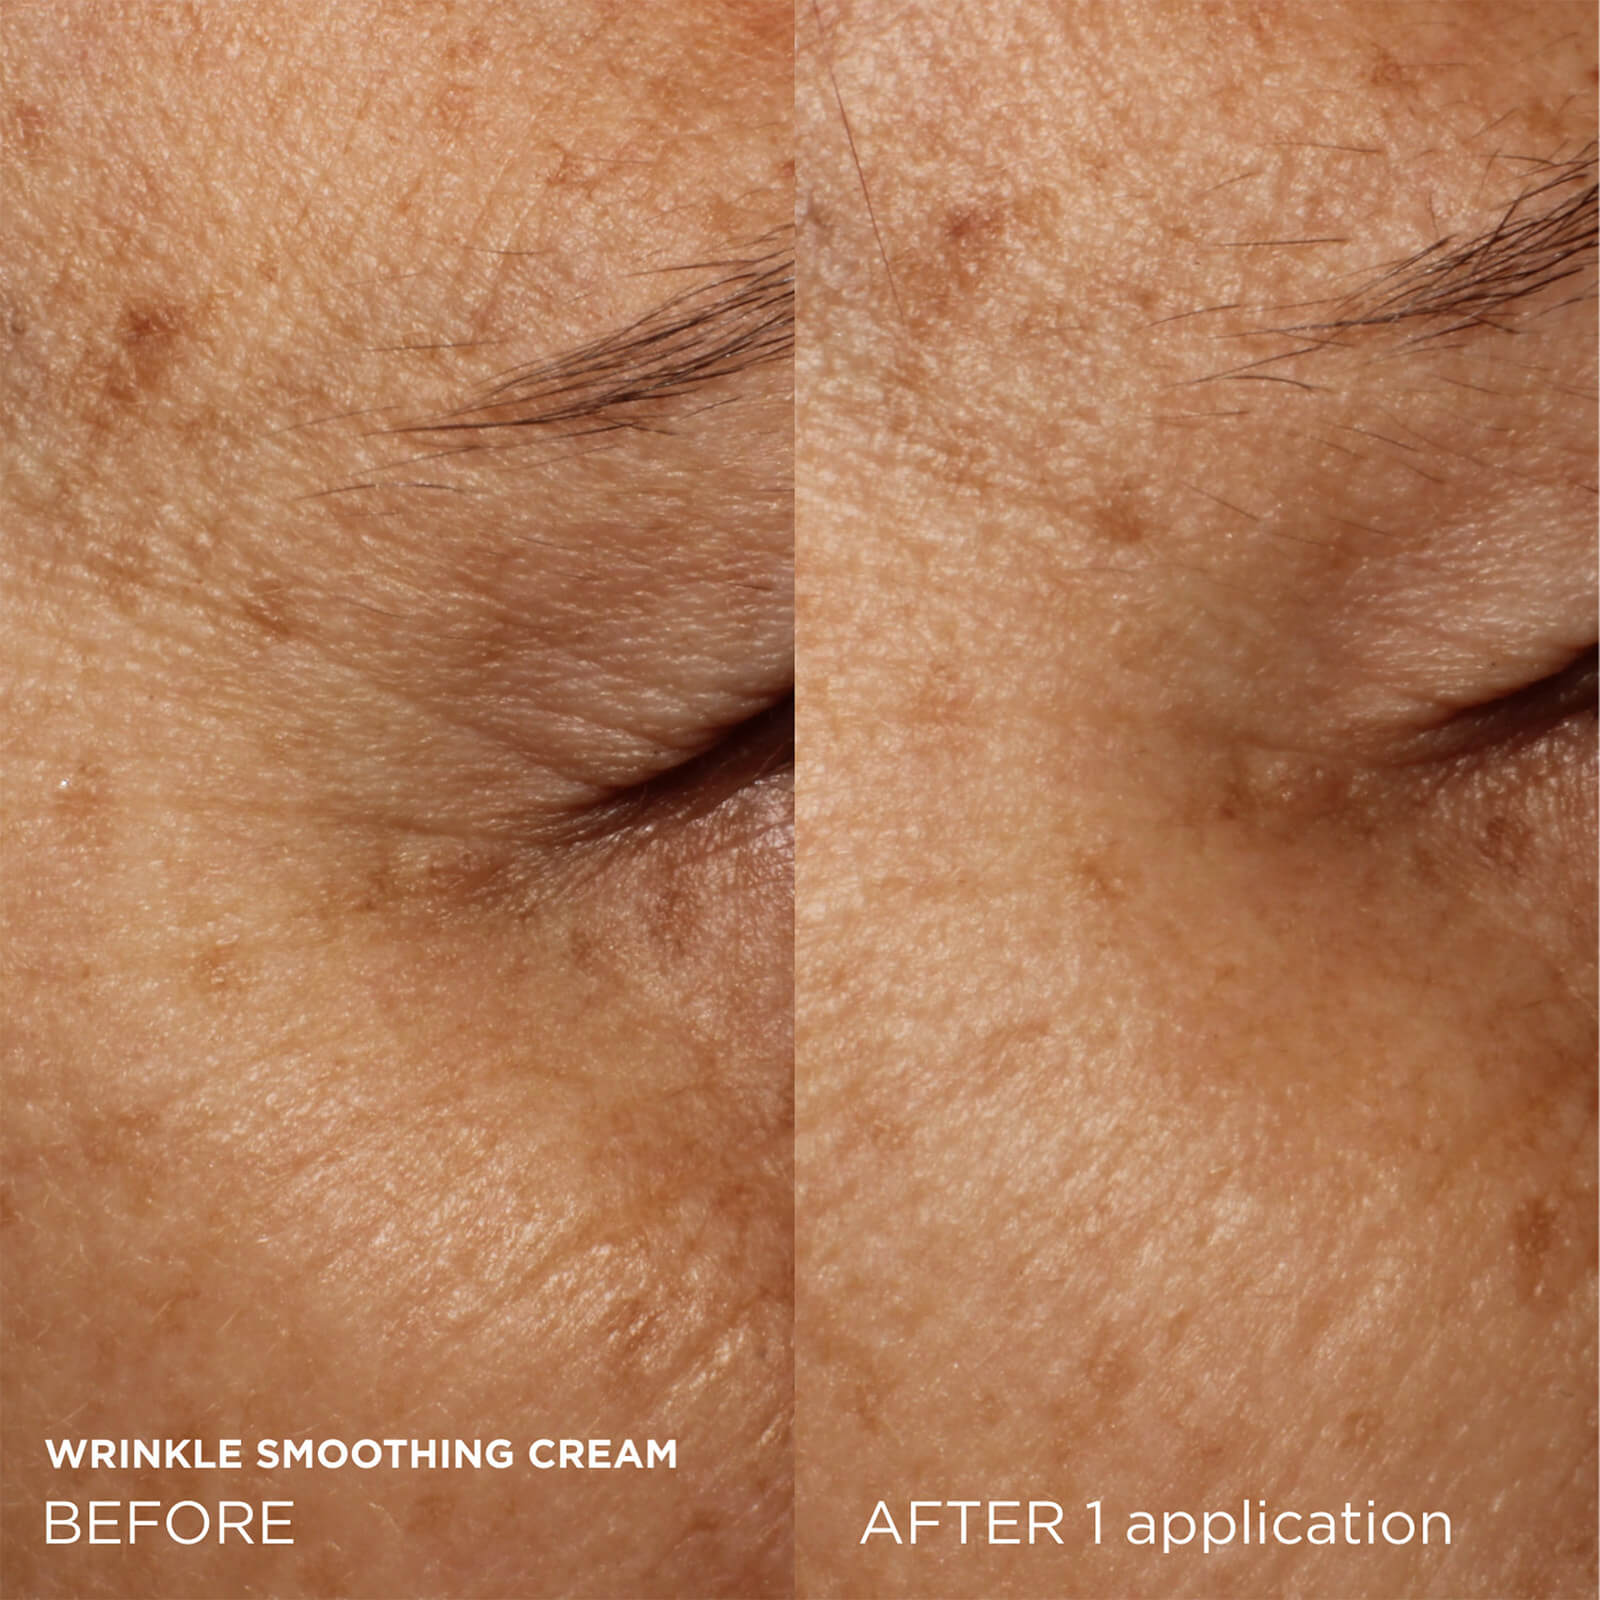 Wrinkle smoothing cream, before. after 1 application